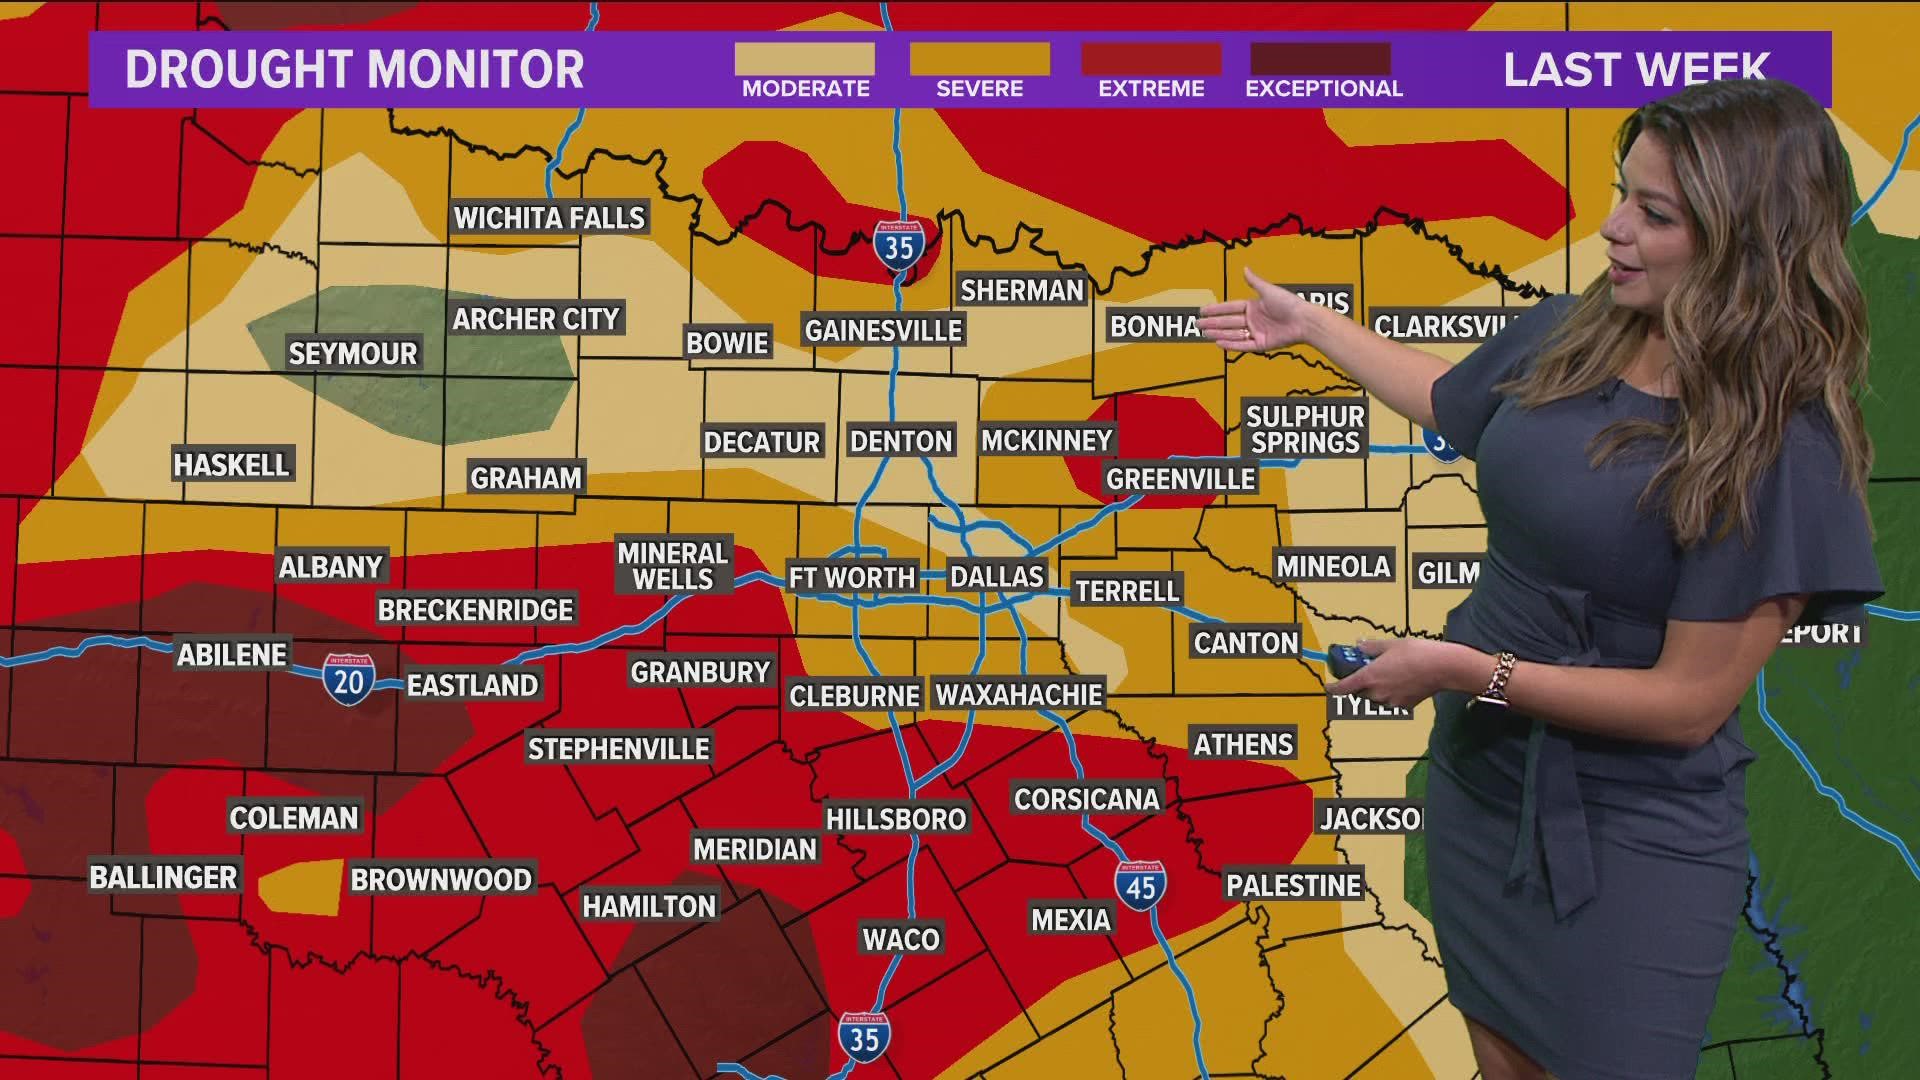 Here's how much the rain helped our drought conditions.